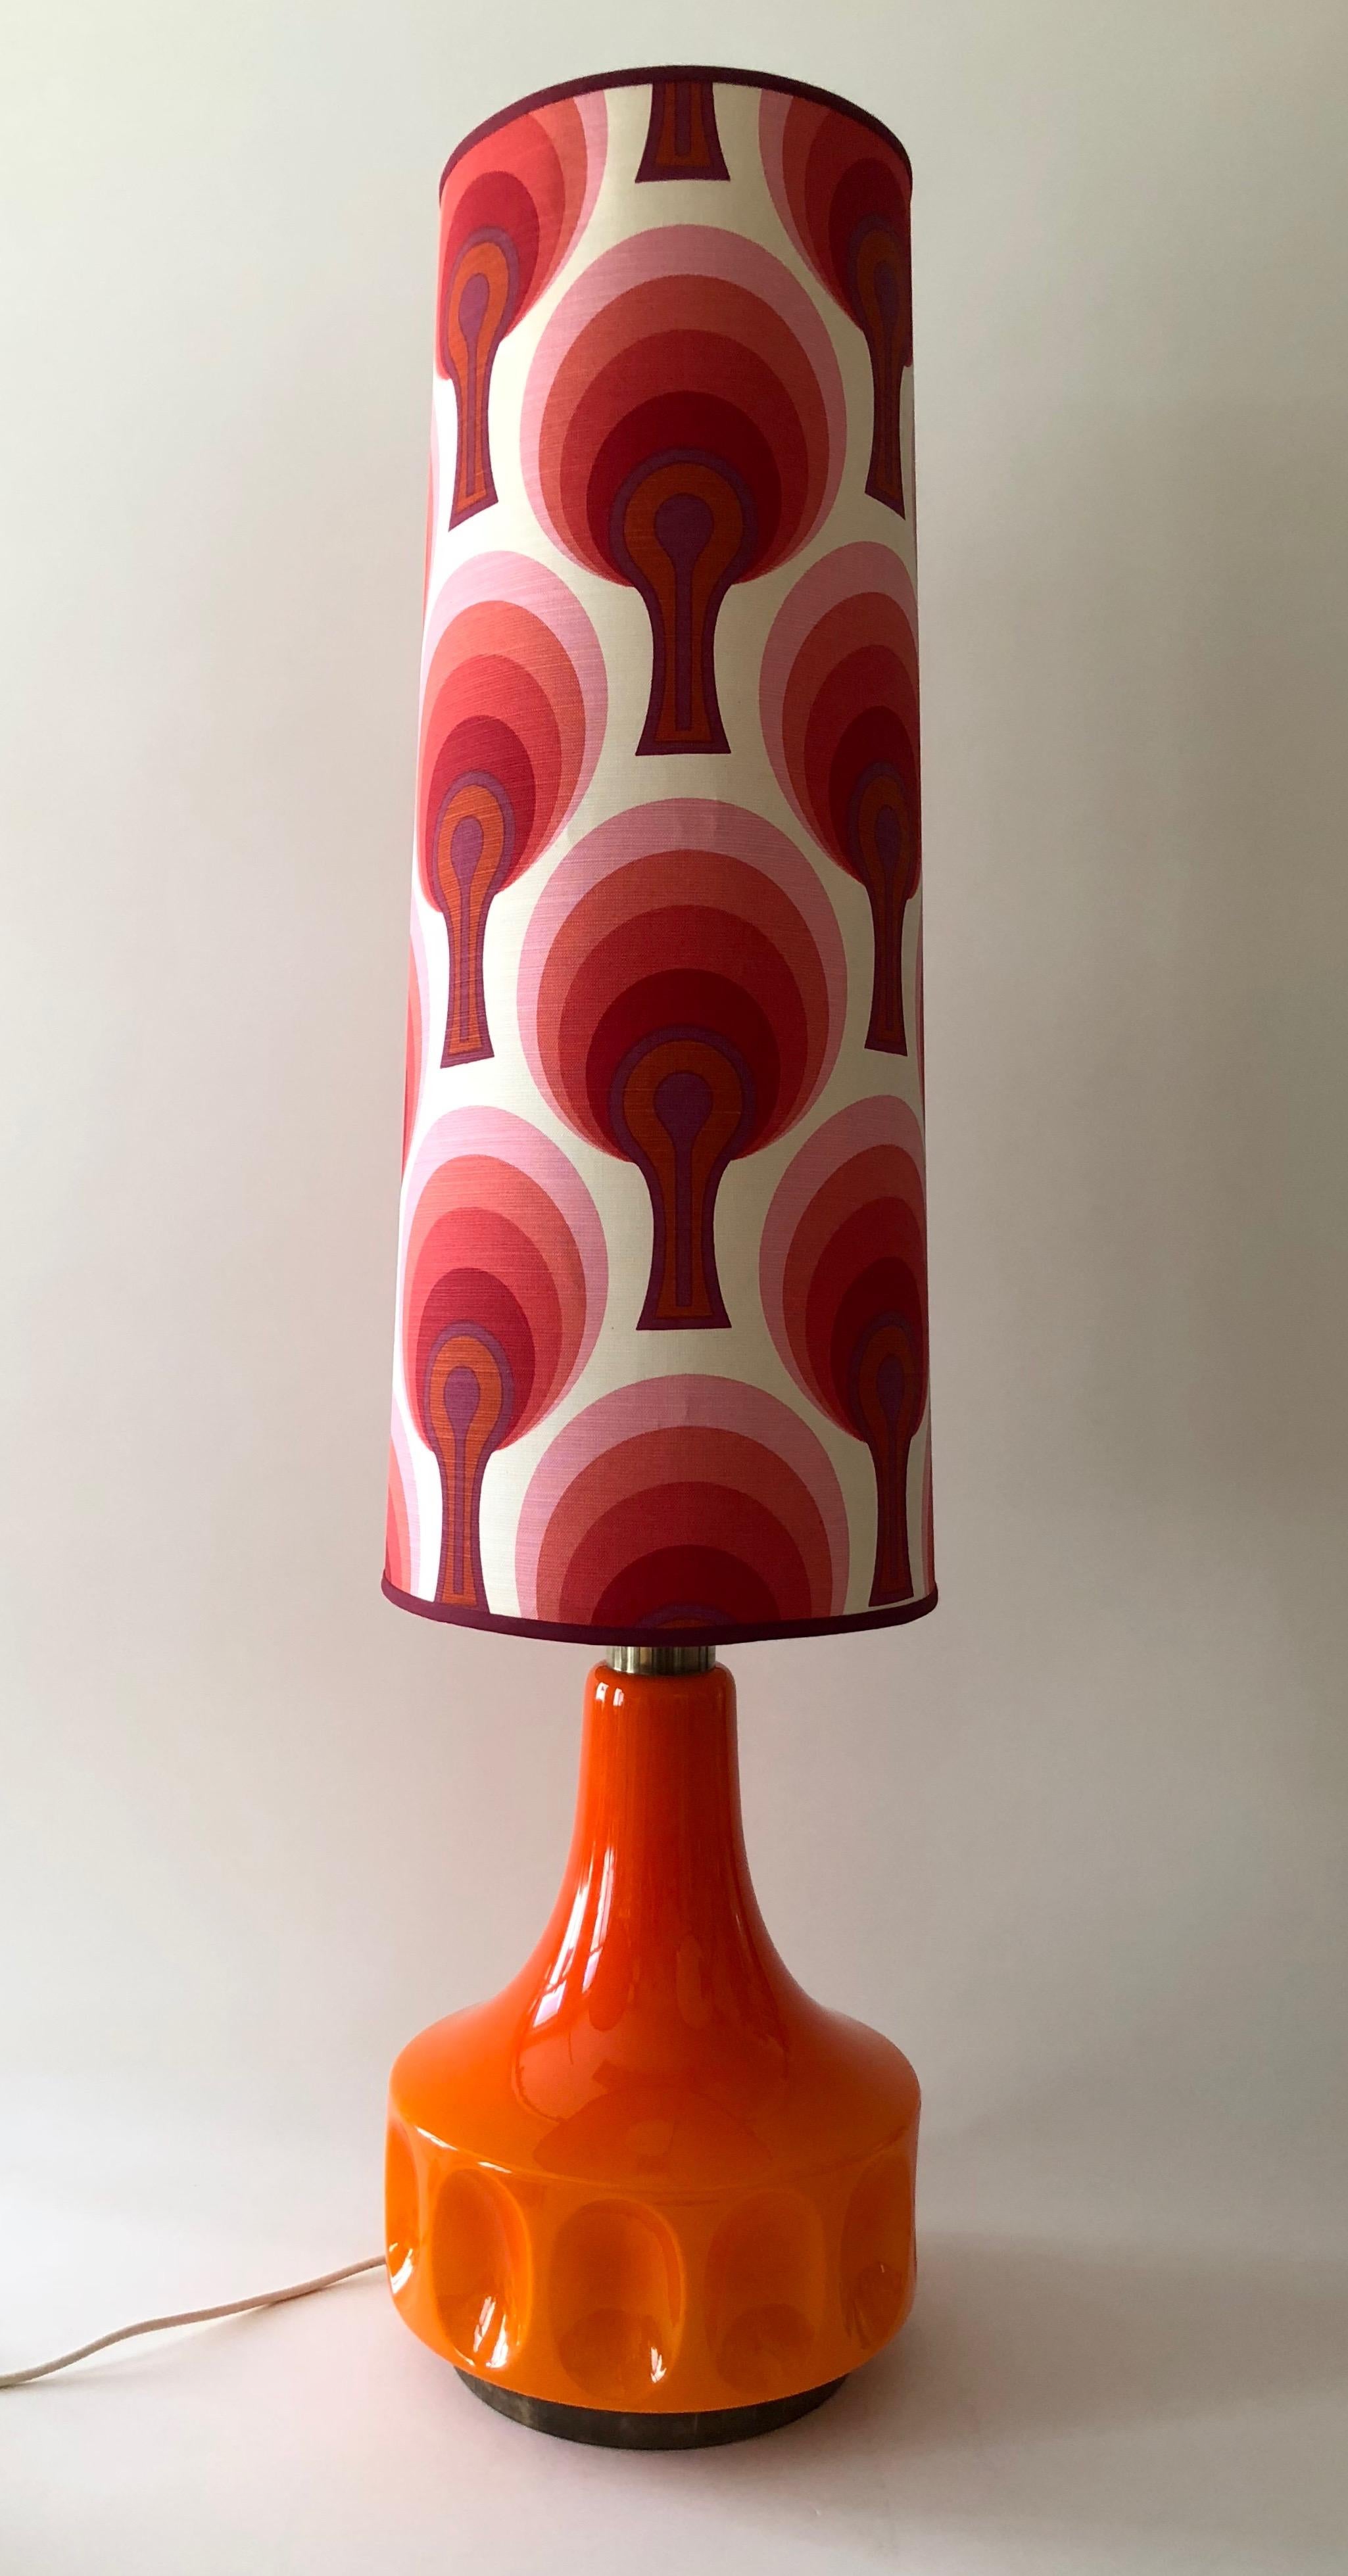 An extra large midcentury floor or table lamp with a fabulous scalloped orange glass base. The original shade is equally interesting with a Classic pattern and in wonderful condition. By using the foot switch, you can illuminate just the base or